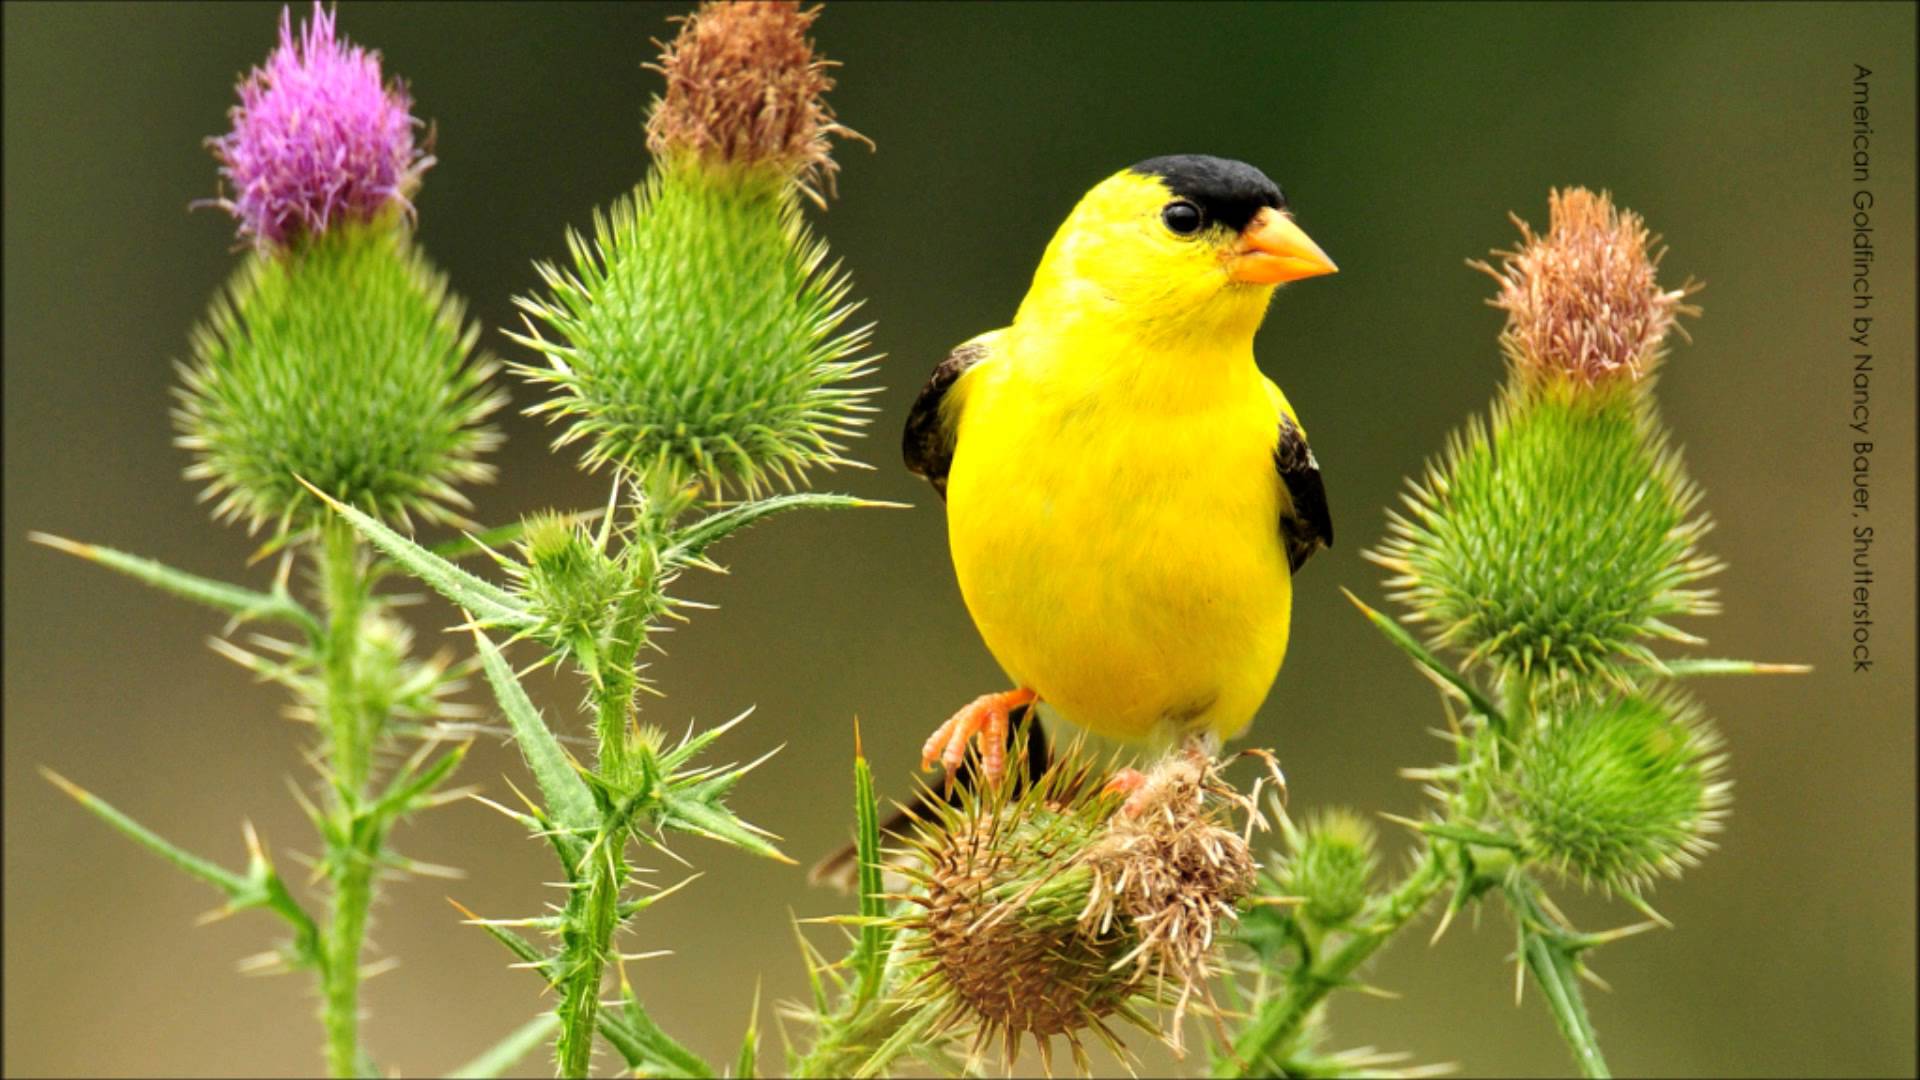 American Goldfinch Song - YouTube